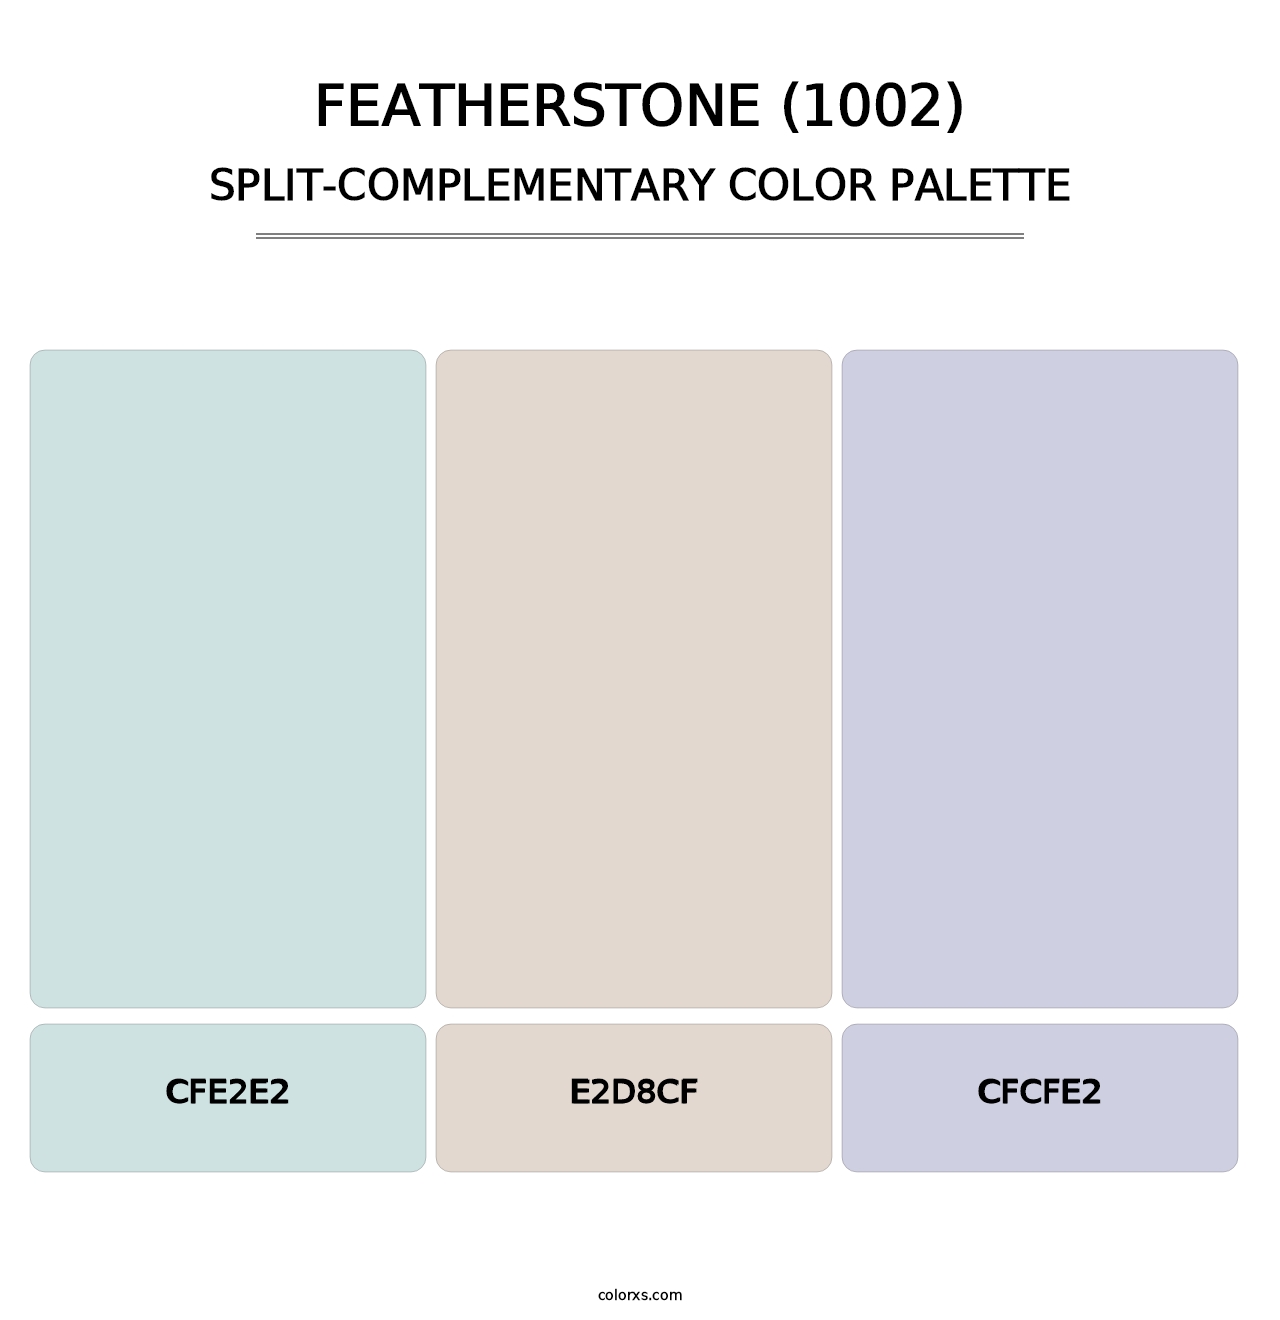 Featherstone (1002) - Split-Complementary Color Palette